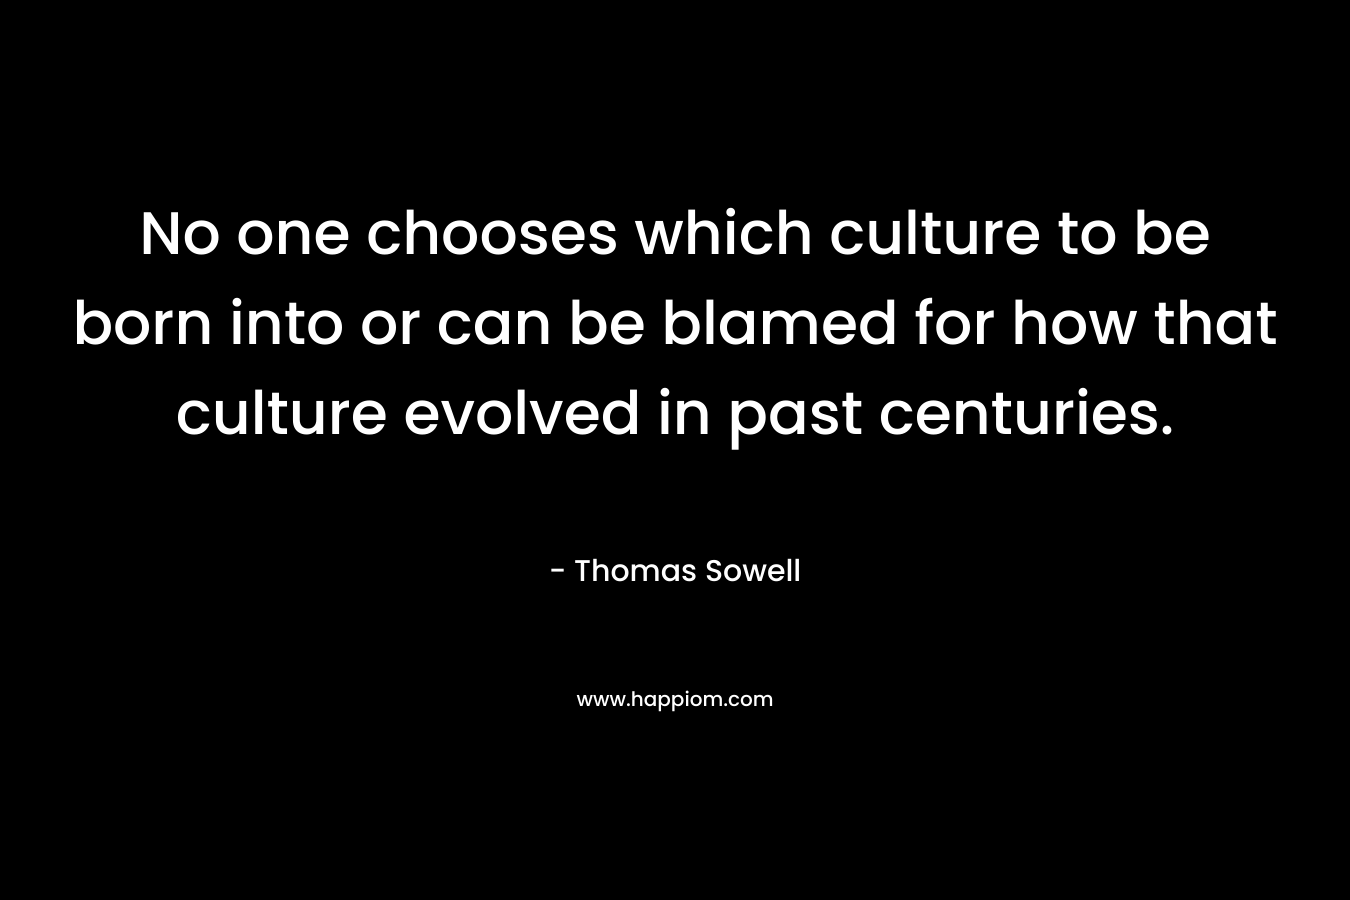 No one chooses which culture to be born into or can be blamed for how that culture evolved in past centuries. – Thomas Sowell